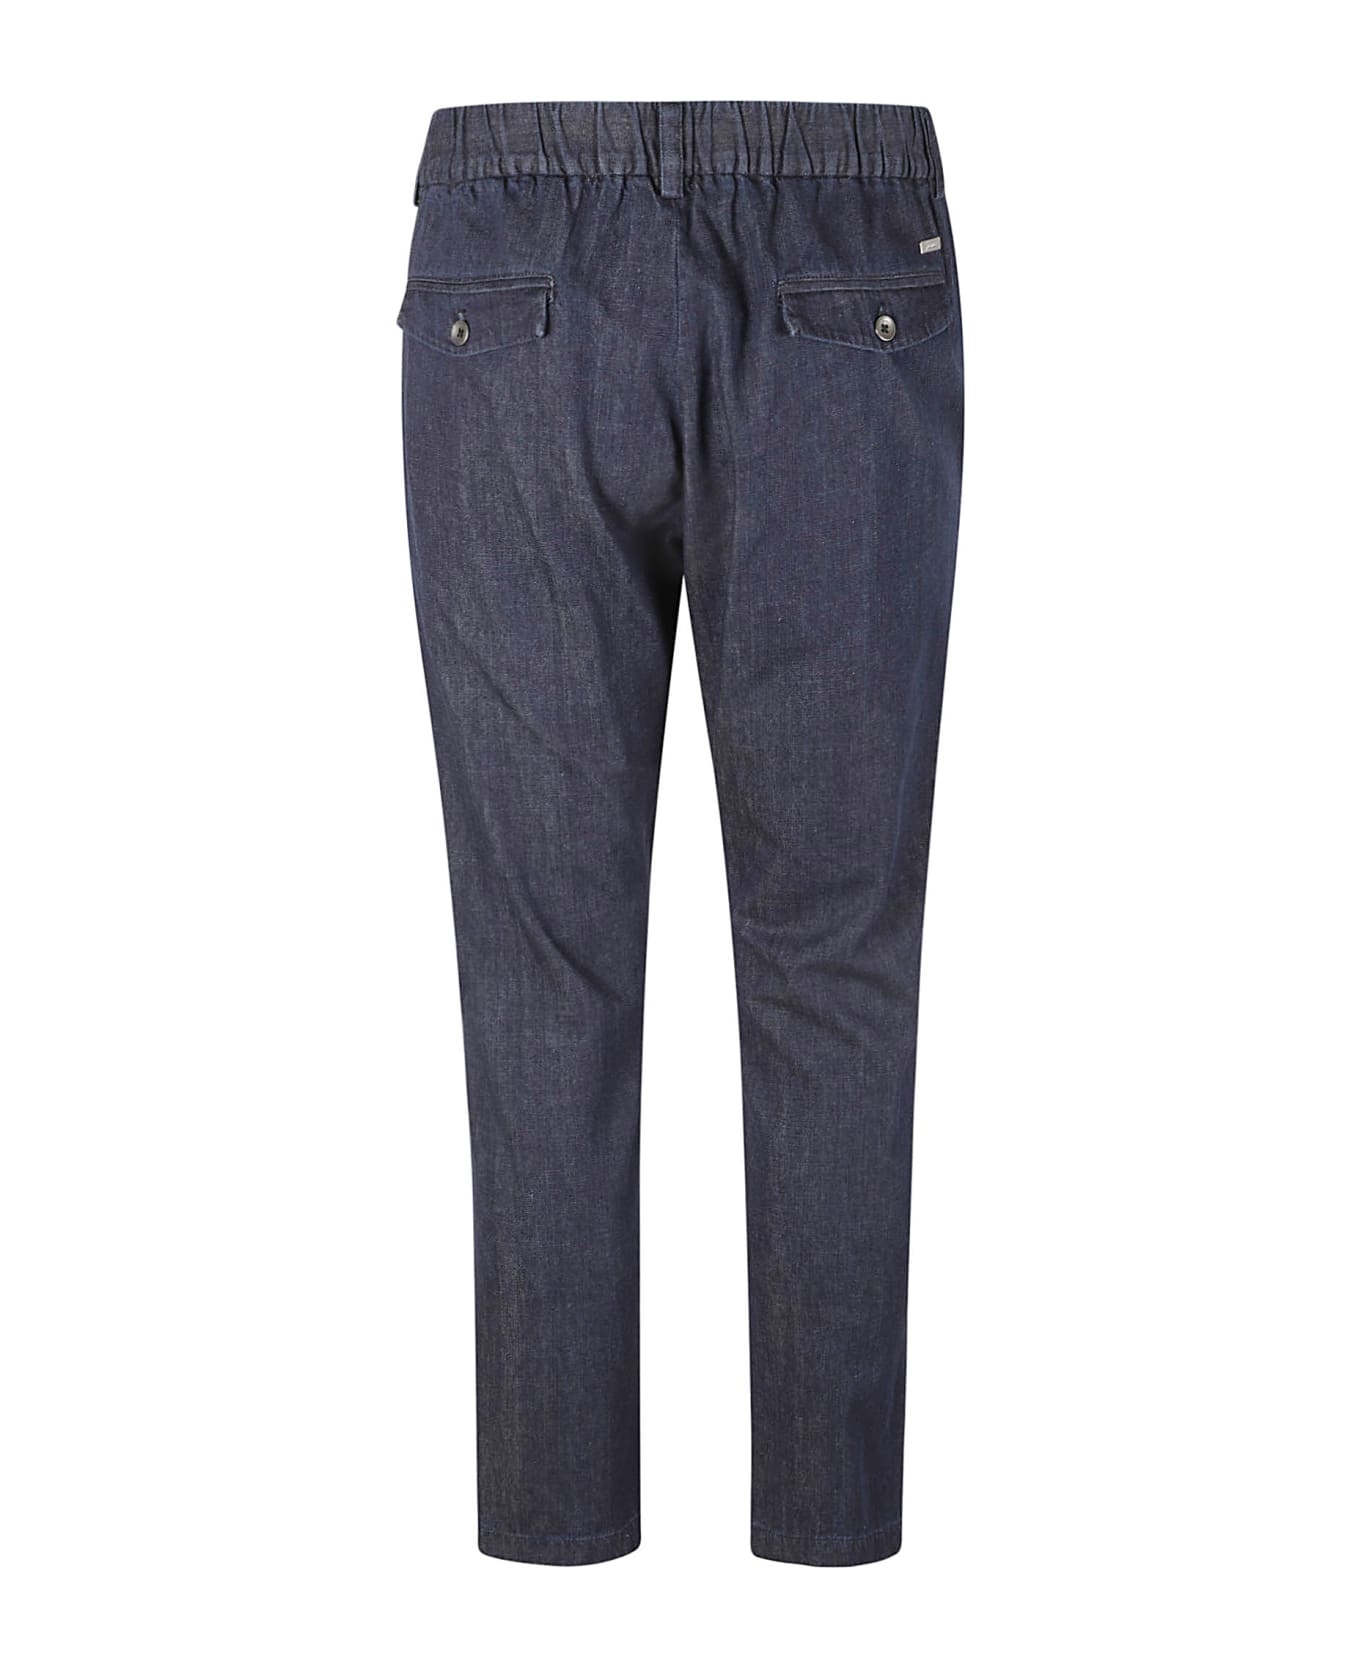 Herno Drawstring Waist Slim Fit Trousers - Blue Navy ボトムス